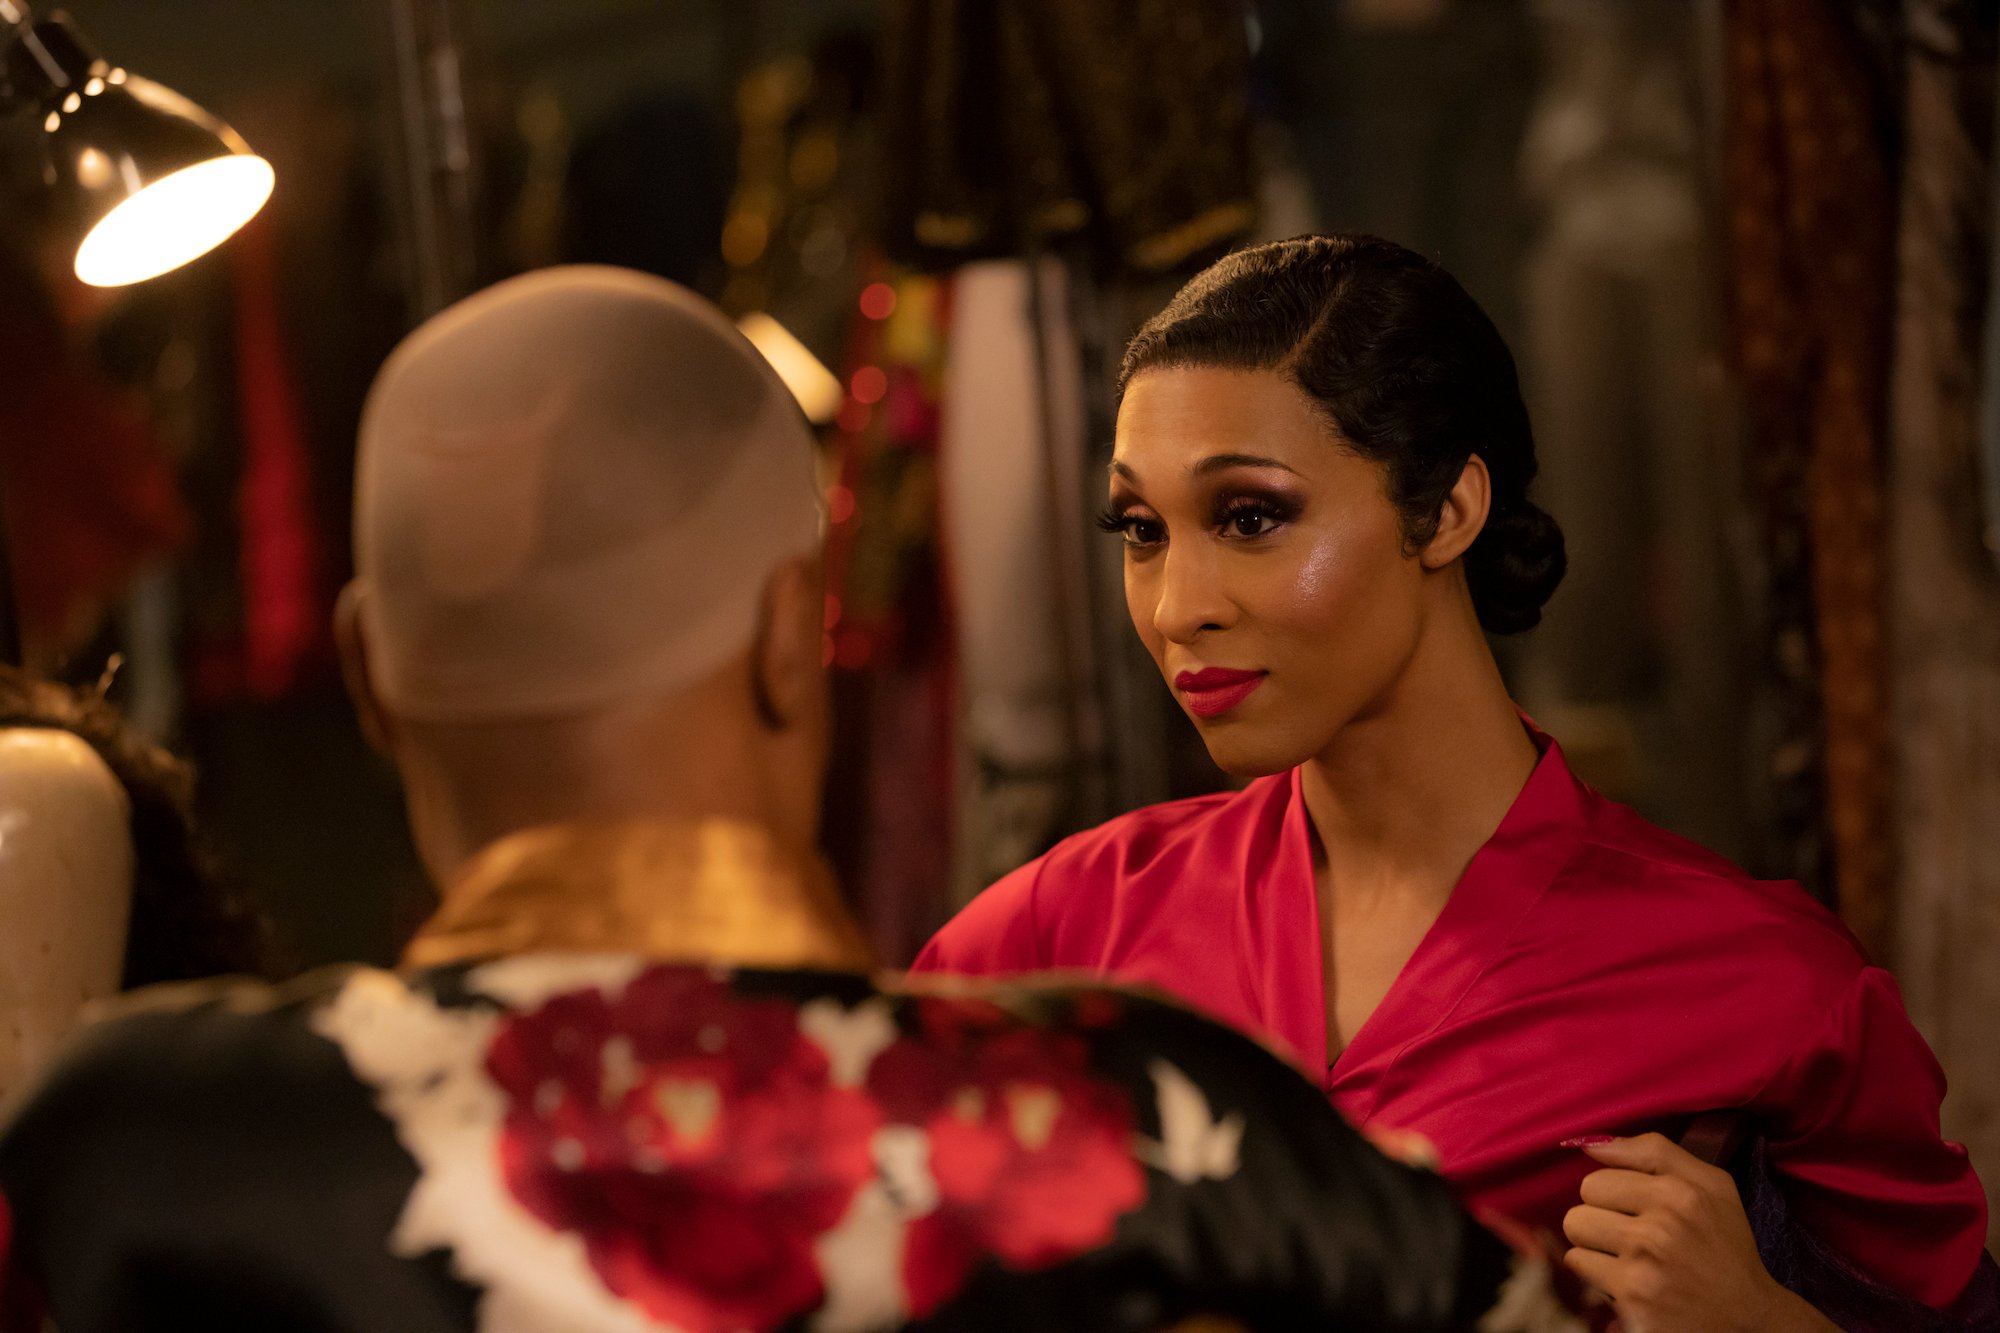 Emmys 2021: Can Mj Rodriguez Take Home the Award for Lead Actress in a Drama Series?